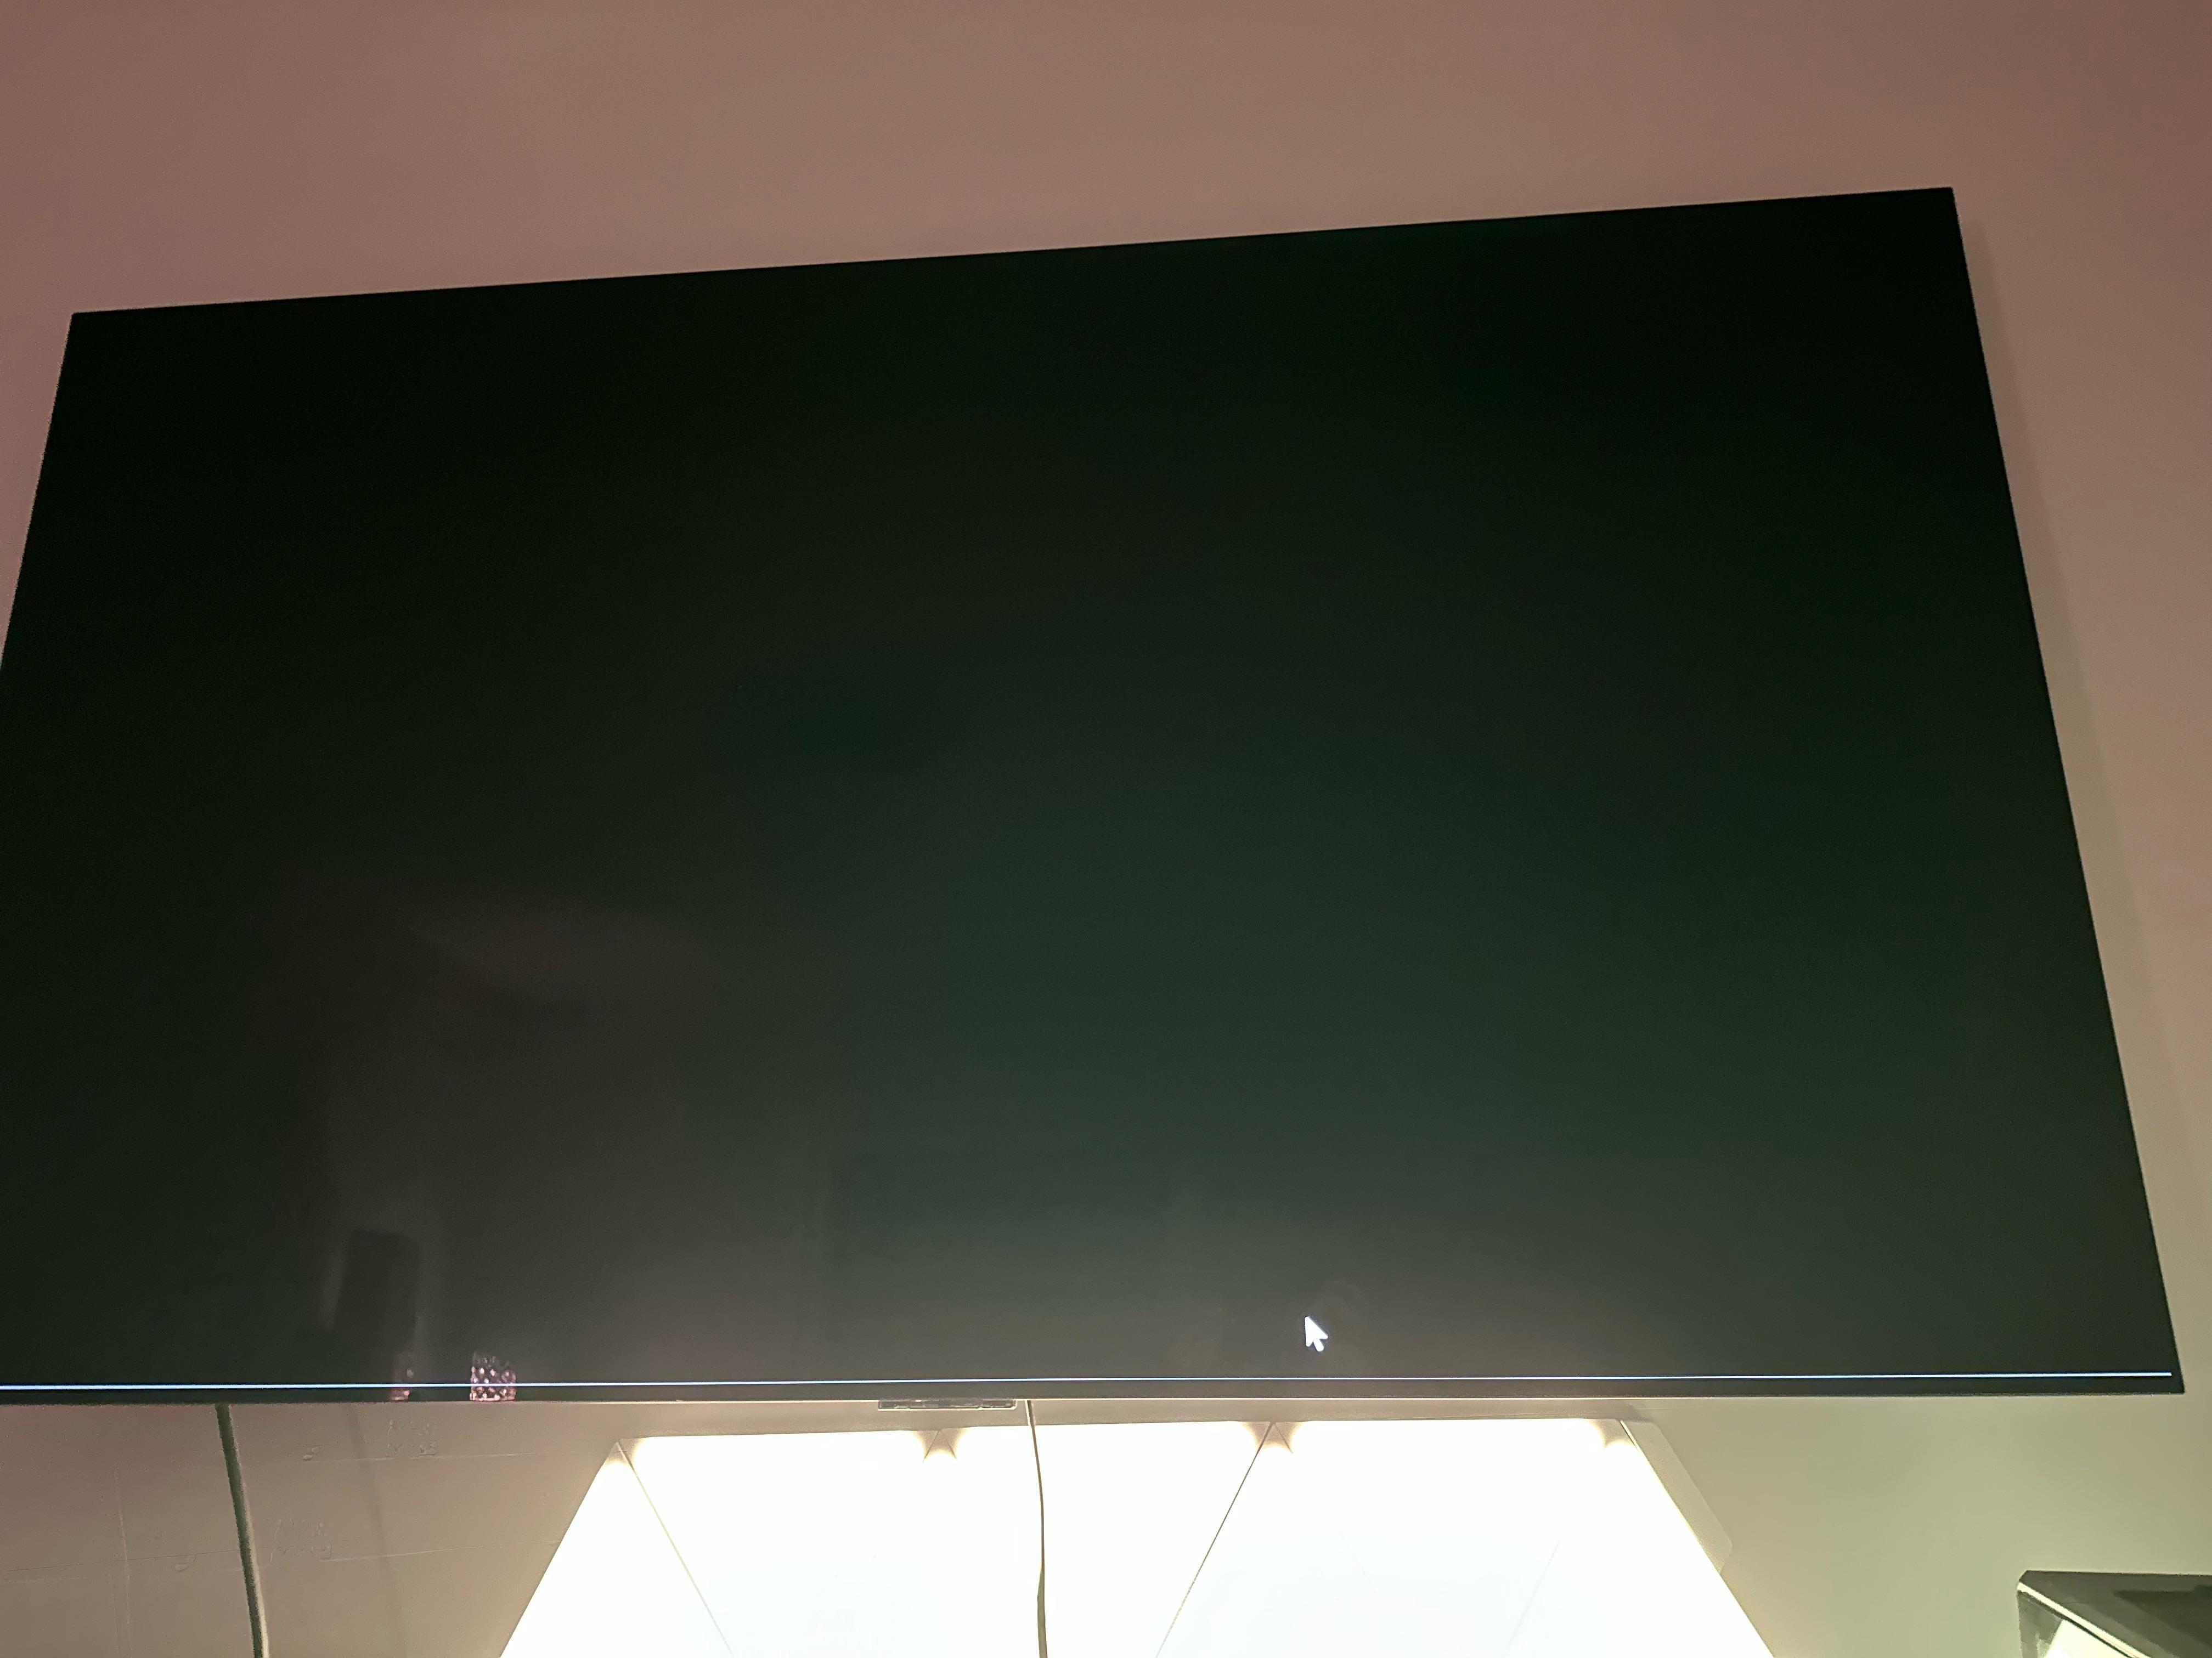 This Is My Lg C2 Oled With A Black Wallpaper How Do I Remove That